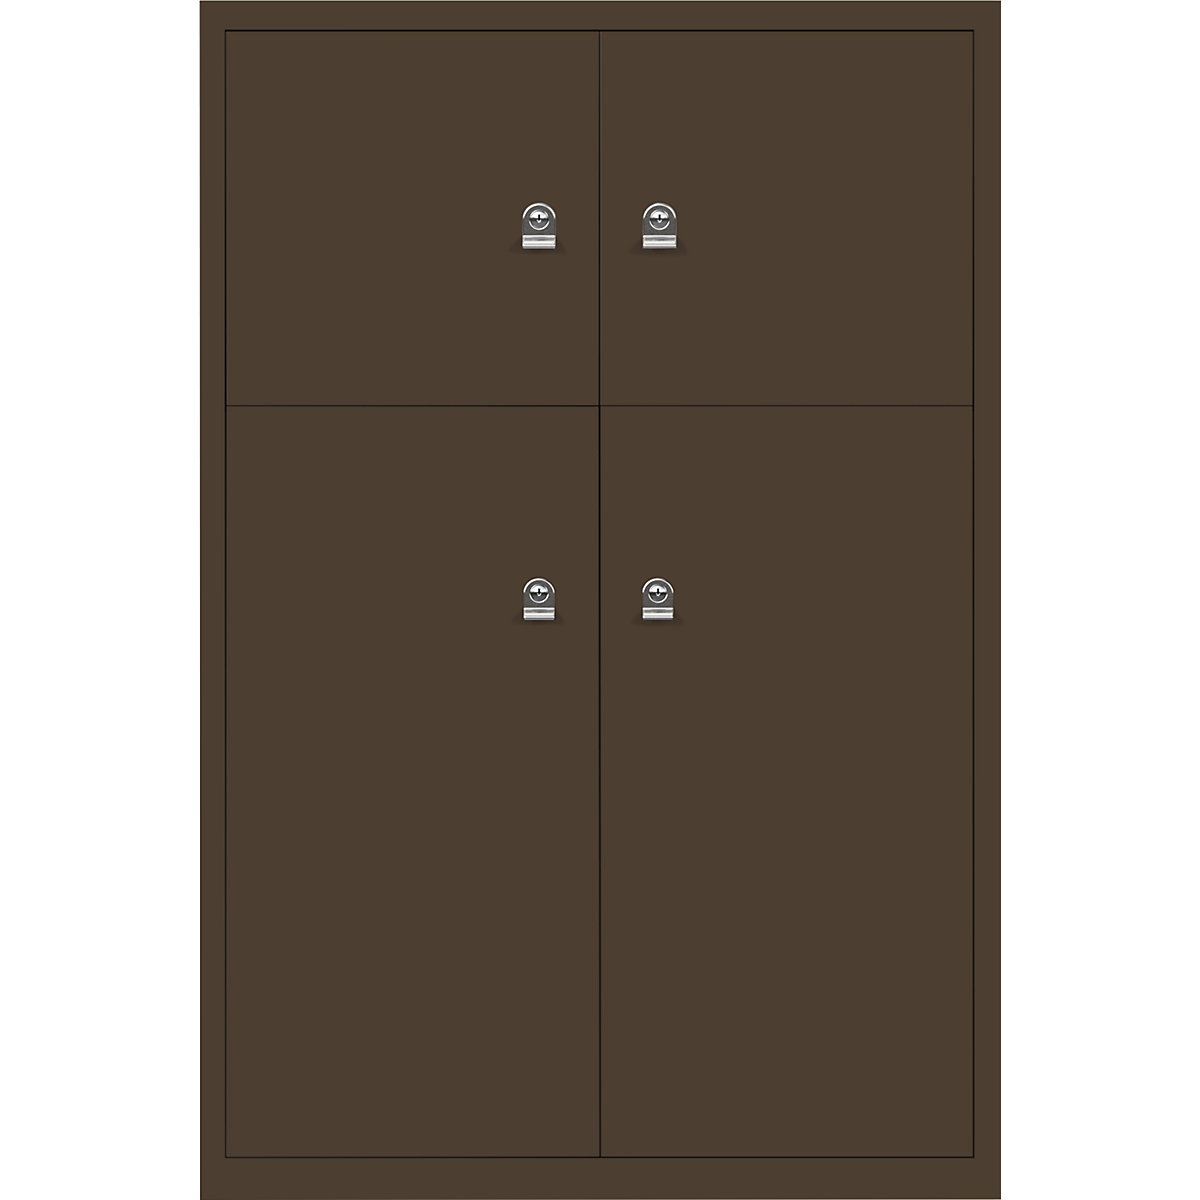 BISLEY – LateralFile™ lodge, with 4 lockable compartments, height 2 x 375 mm, 2 x 755 mm, coffee